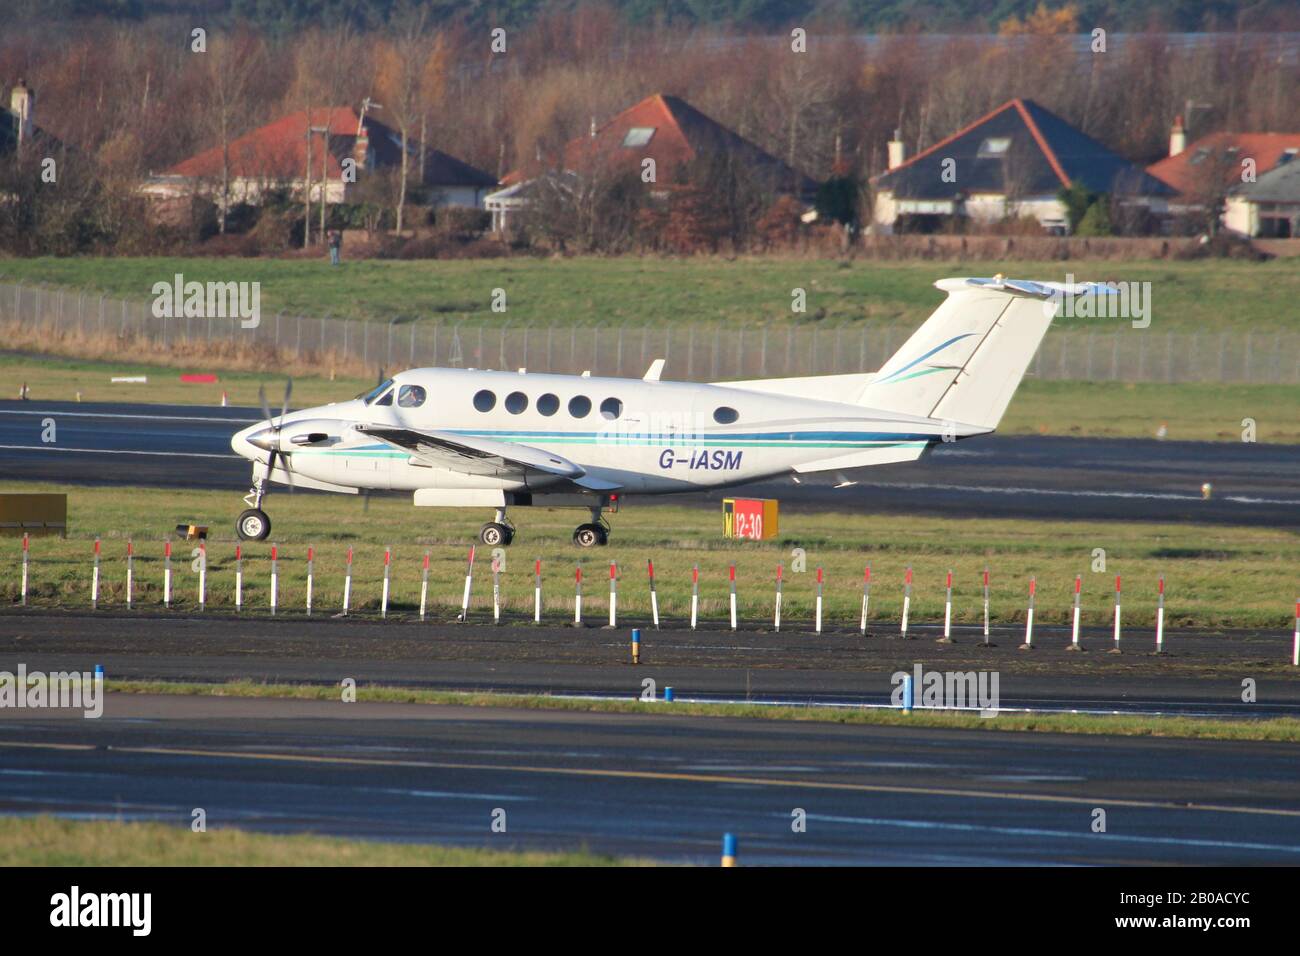 G-IASM, a Beechcraft B200 Super King Air operated by 2Excel Aviation/Broadsword Aviation, at Prestwick International Airport in Ayrshire. Stock Photo